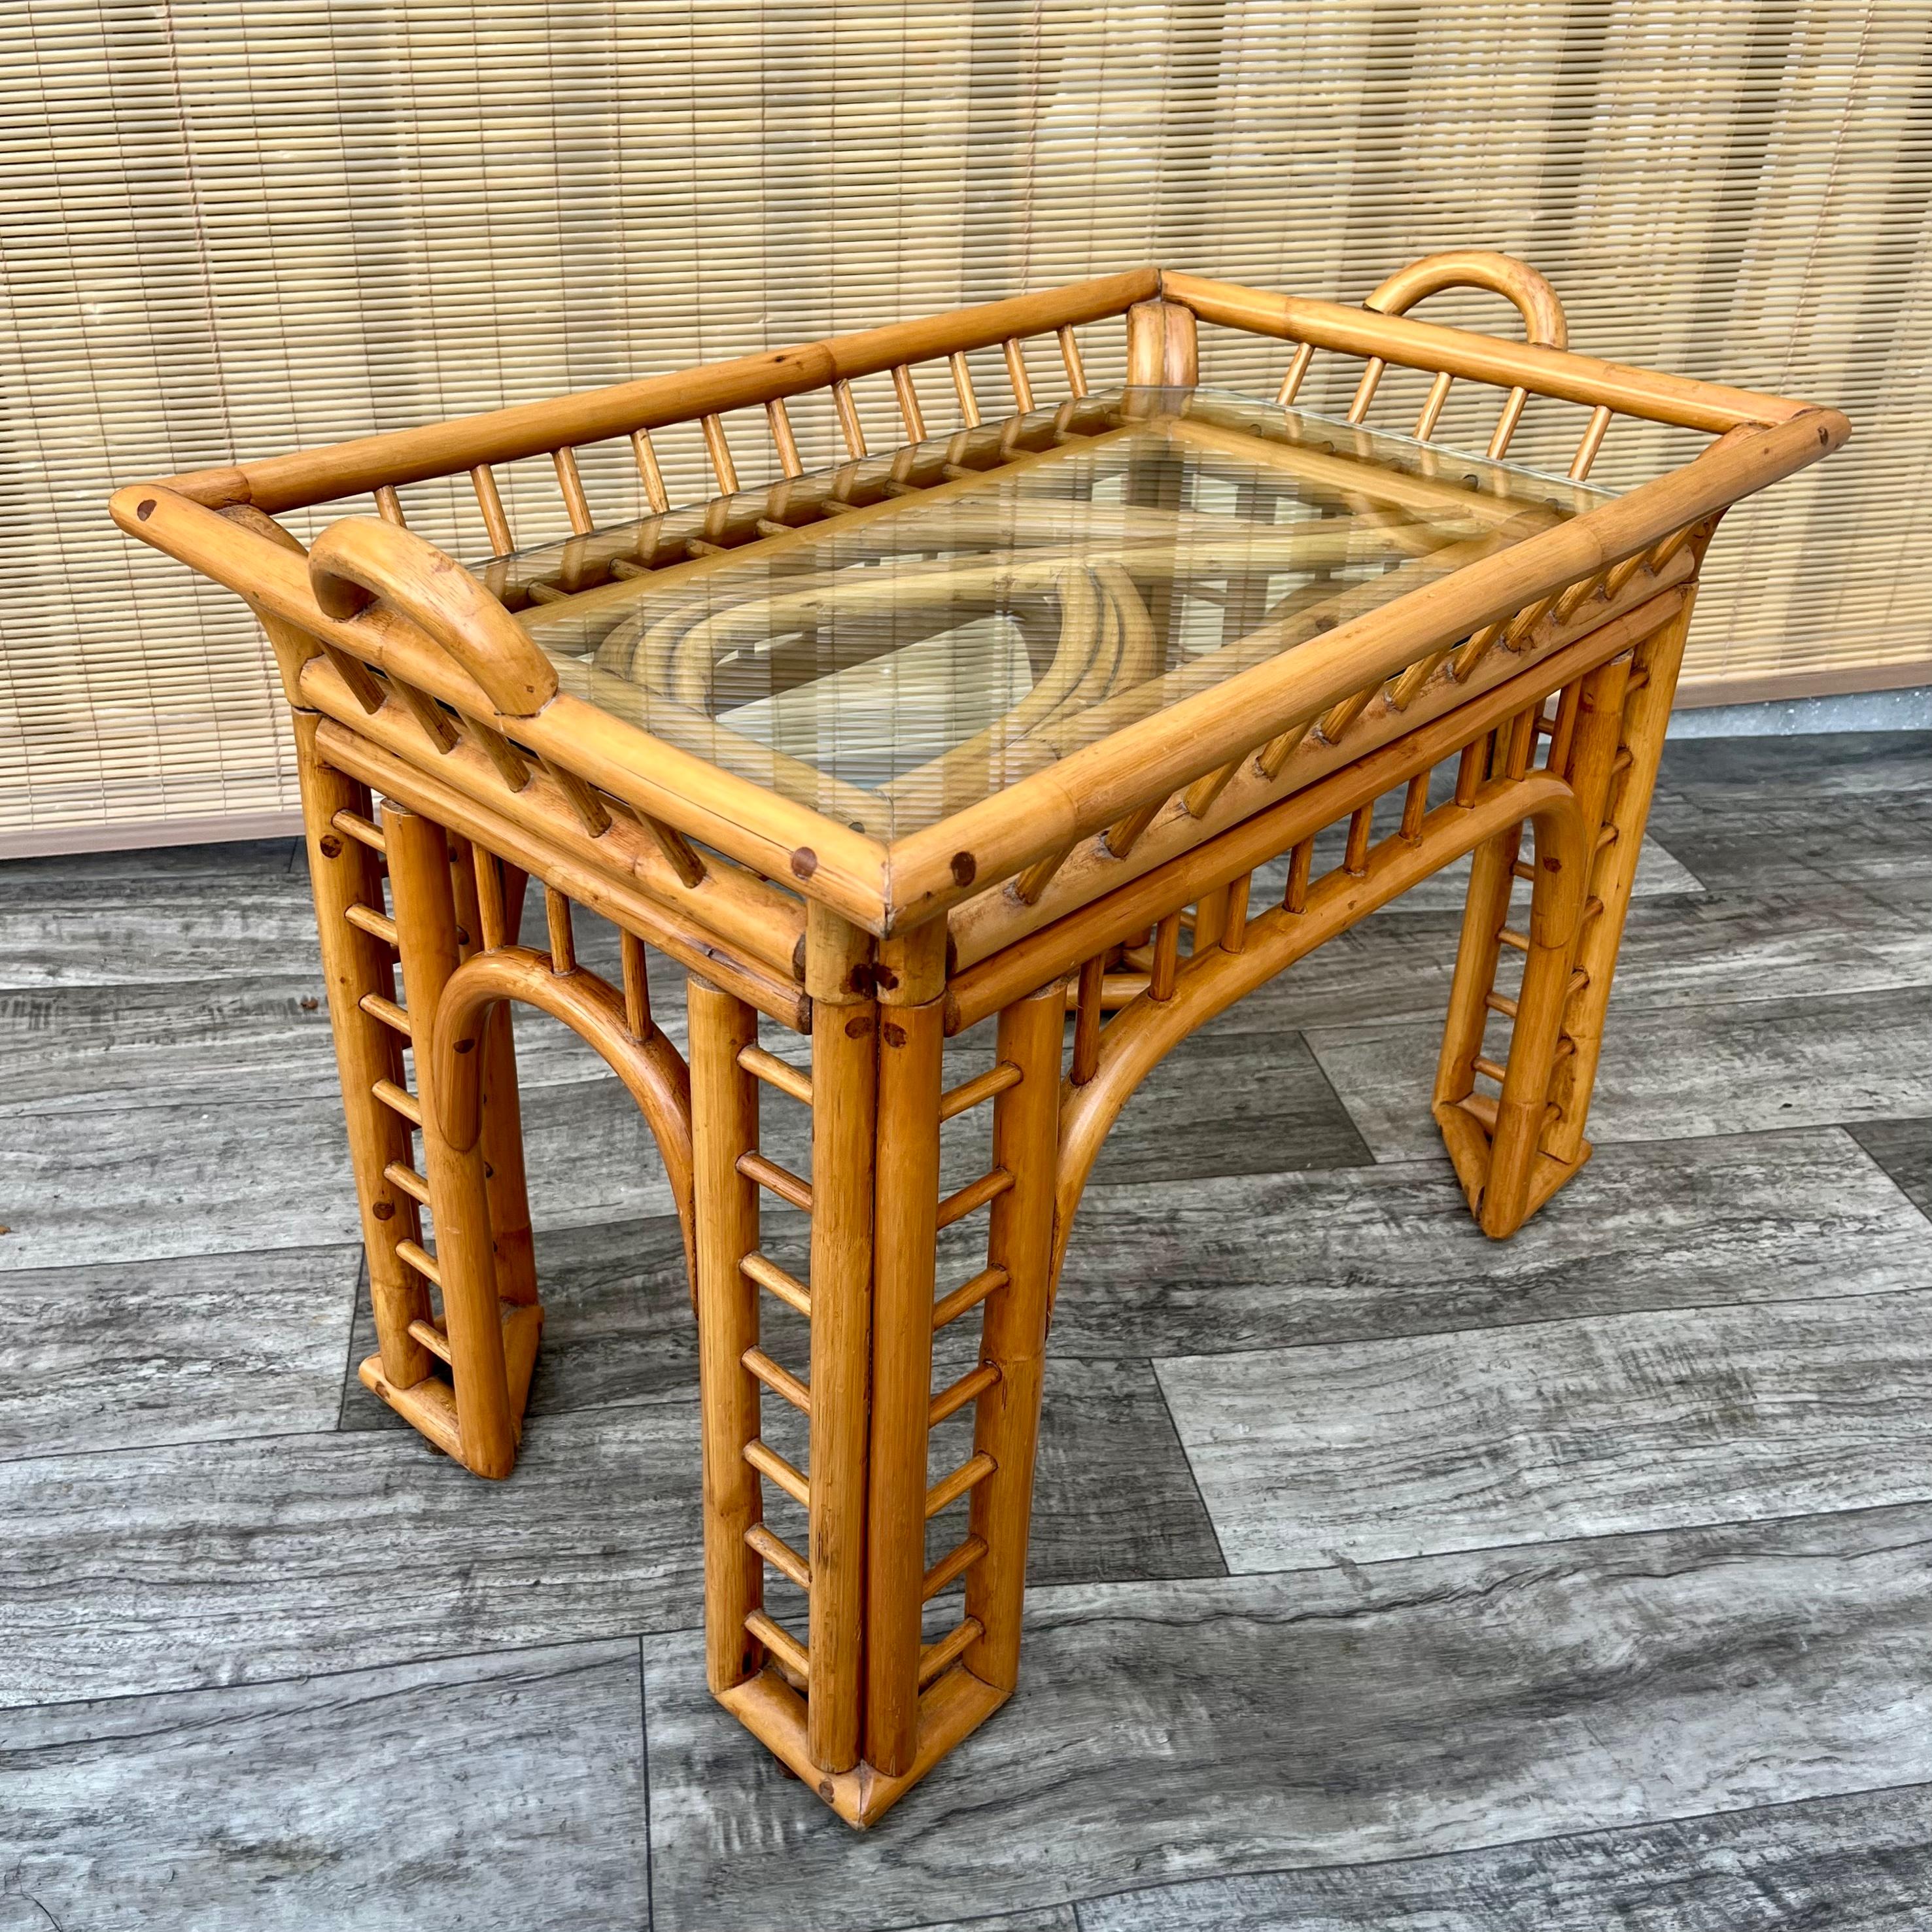 Vintage Mid Century Modern Coastal Style Bent Rattan Side Table with Removable Tray by Whitecraft Rattan Inc, Miami FL. Circa 1970s 
Features a bent rattan frame with an intricate and dynamic fluid design and removable serving tray. 
In excellent